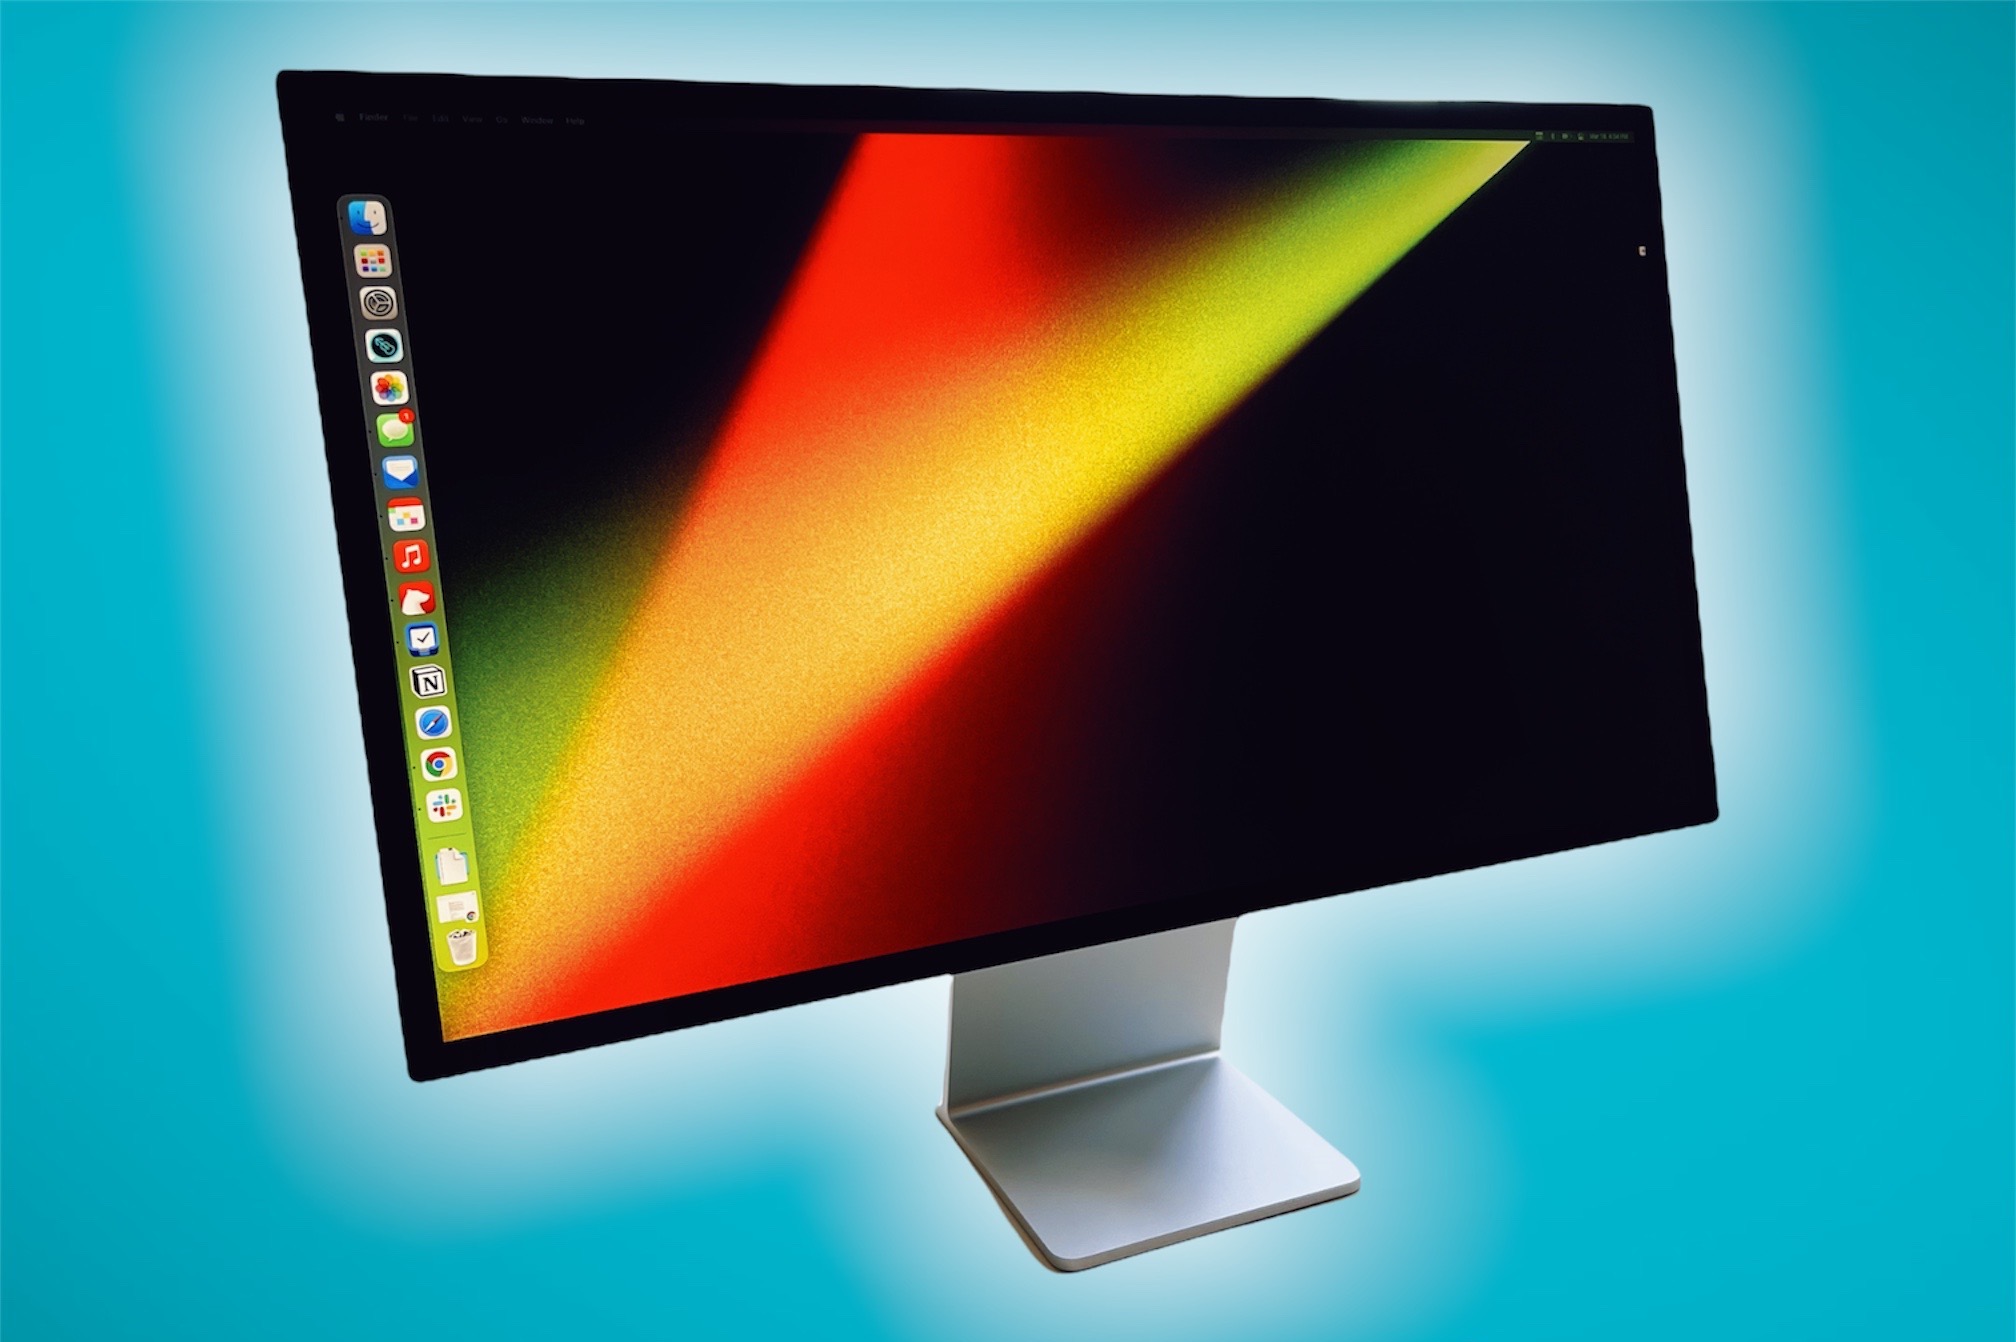 Review: Is the Apple Studio Display Just an Overpriced Monitor?